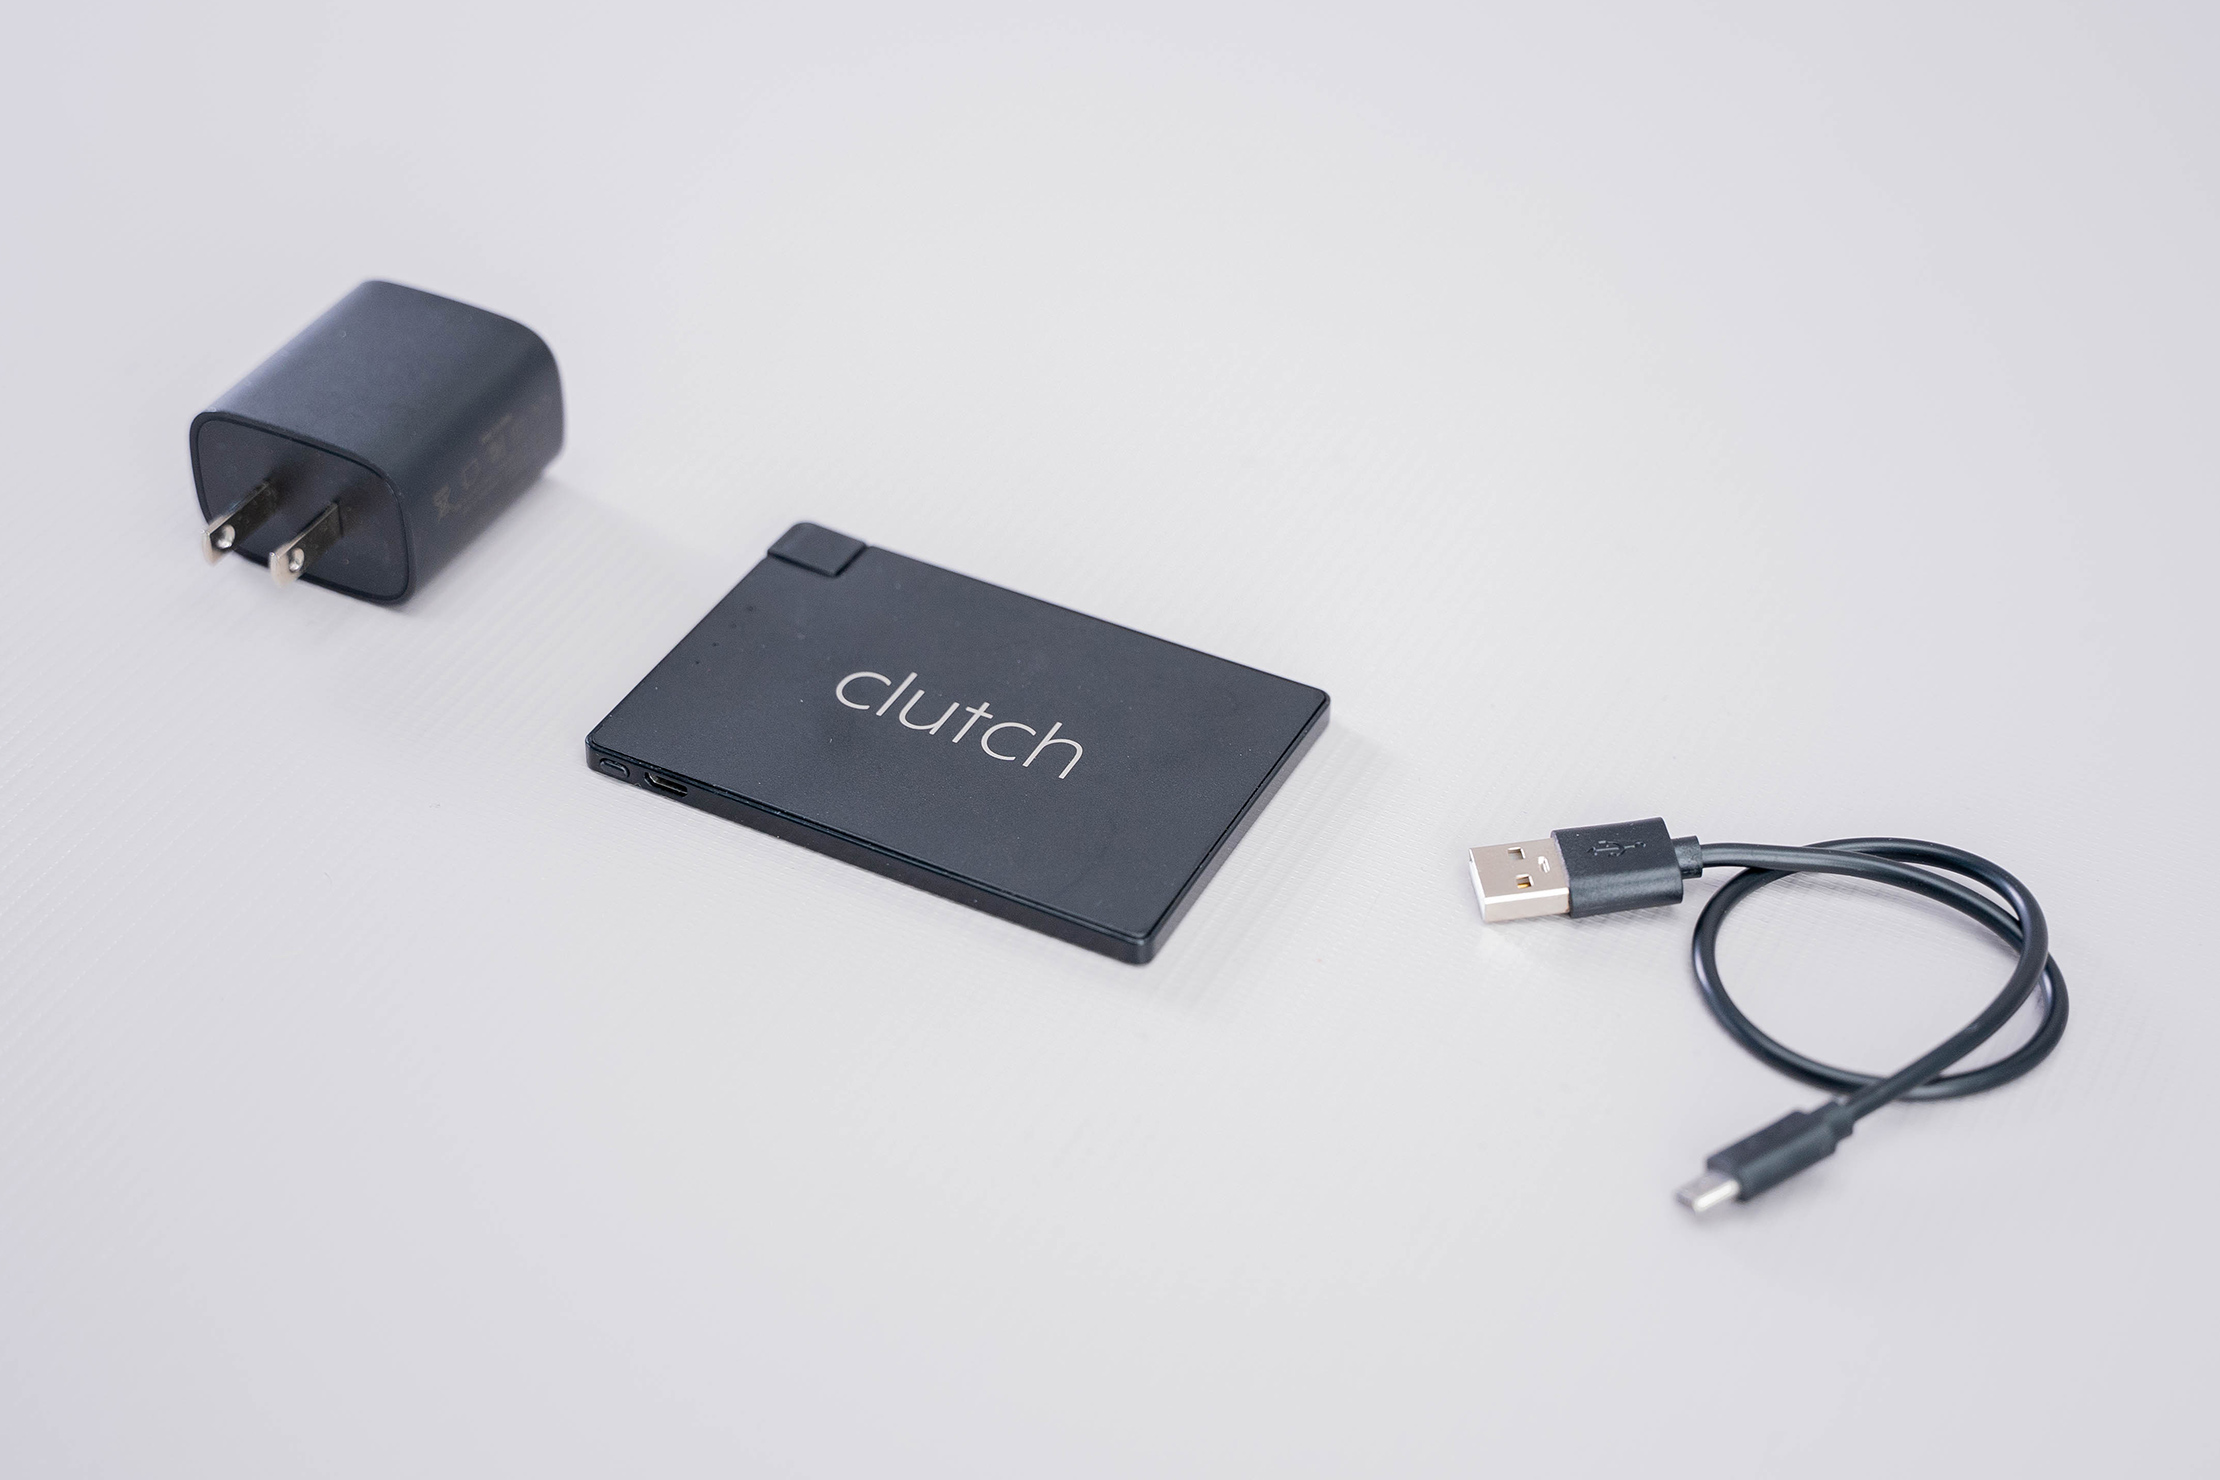 Clutch Charger V2 Accessories